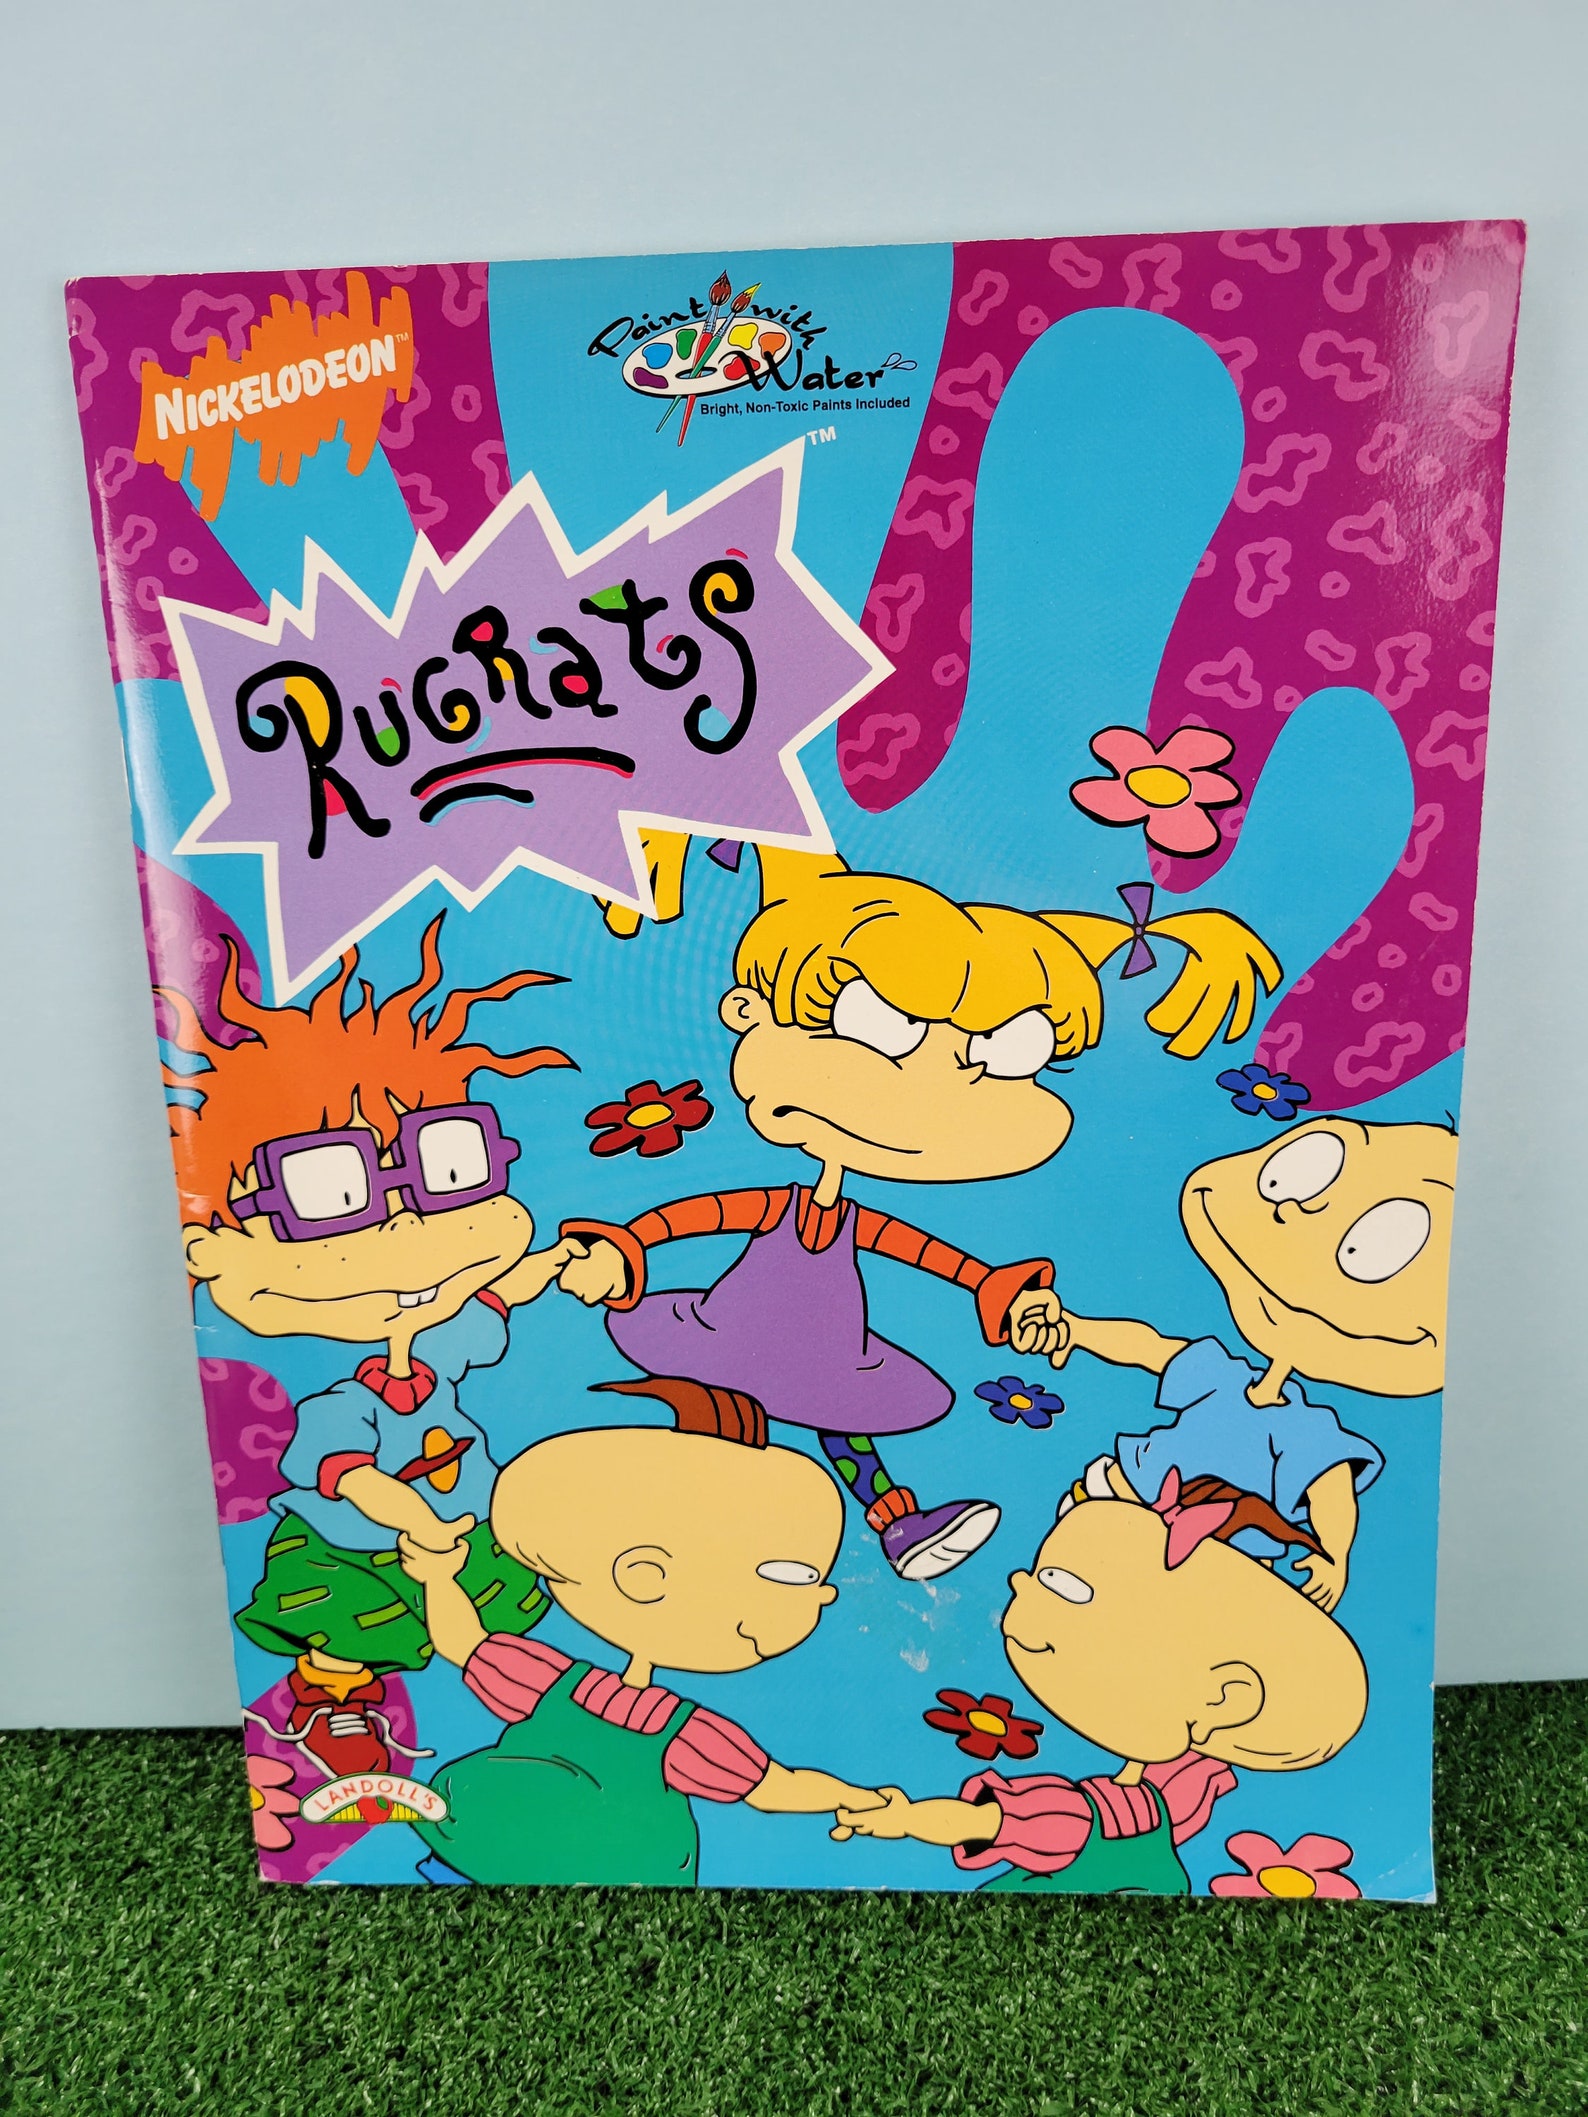 Nickelodeon Rugrats Paint With Water Book Unused | Etsy